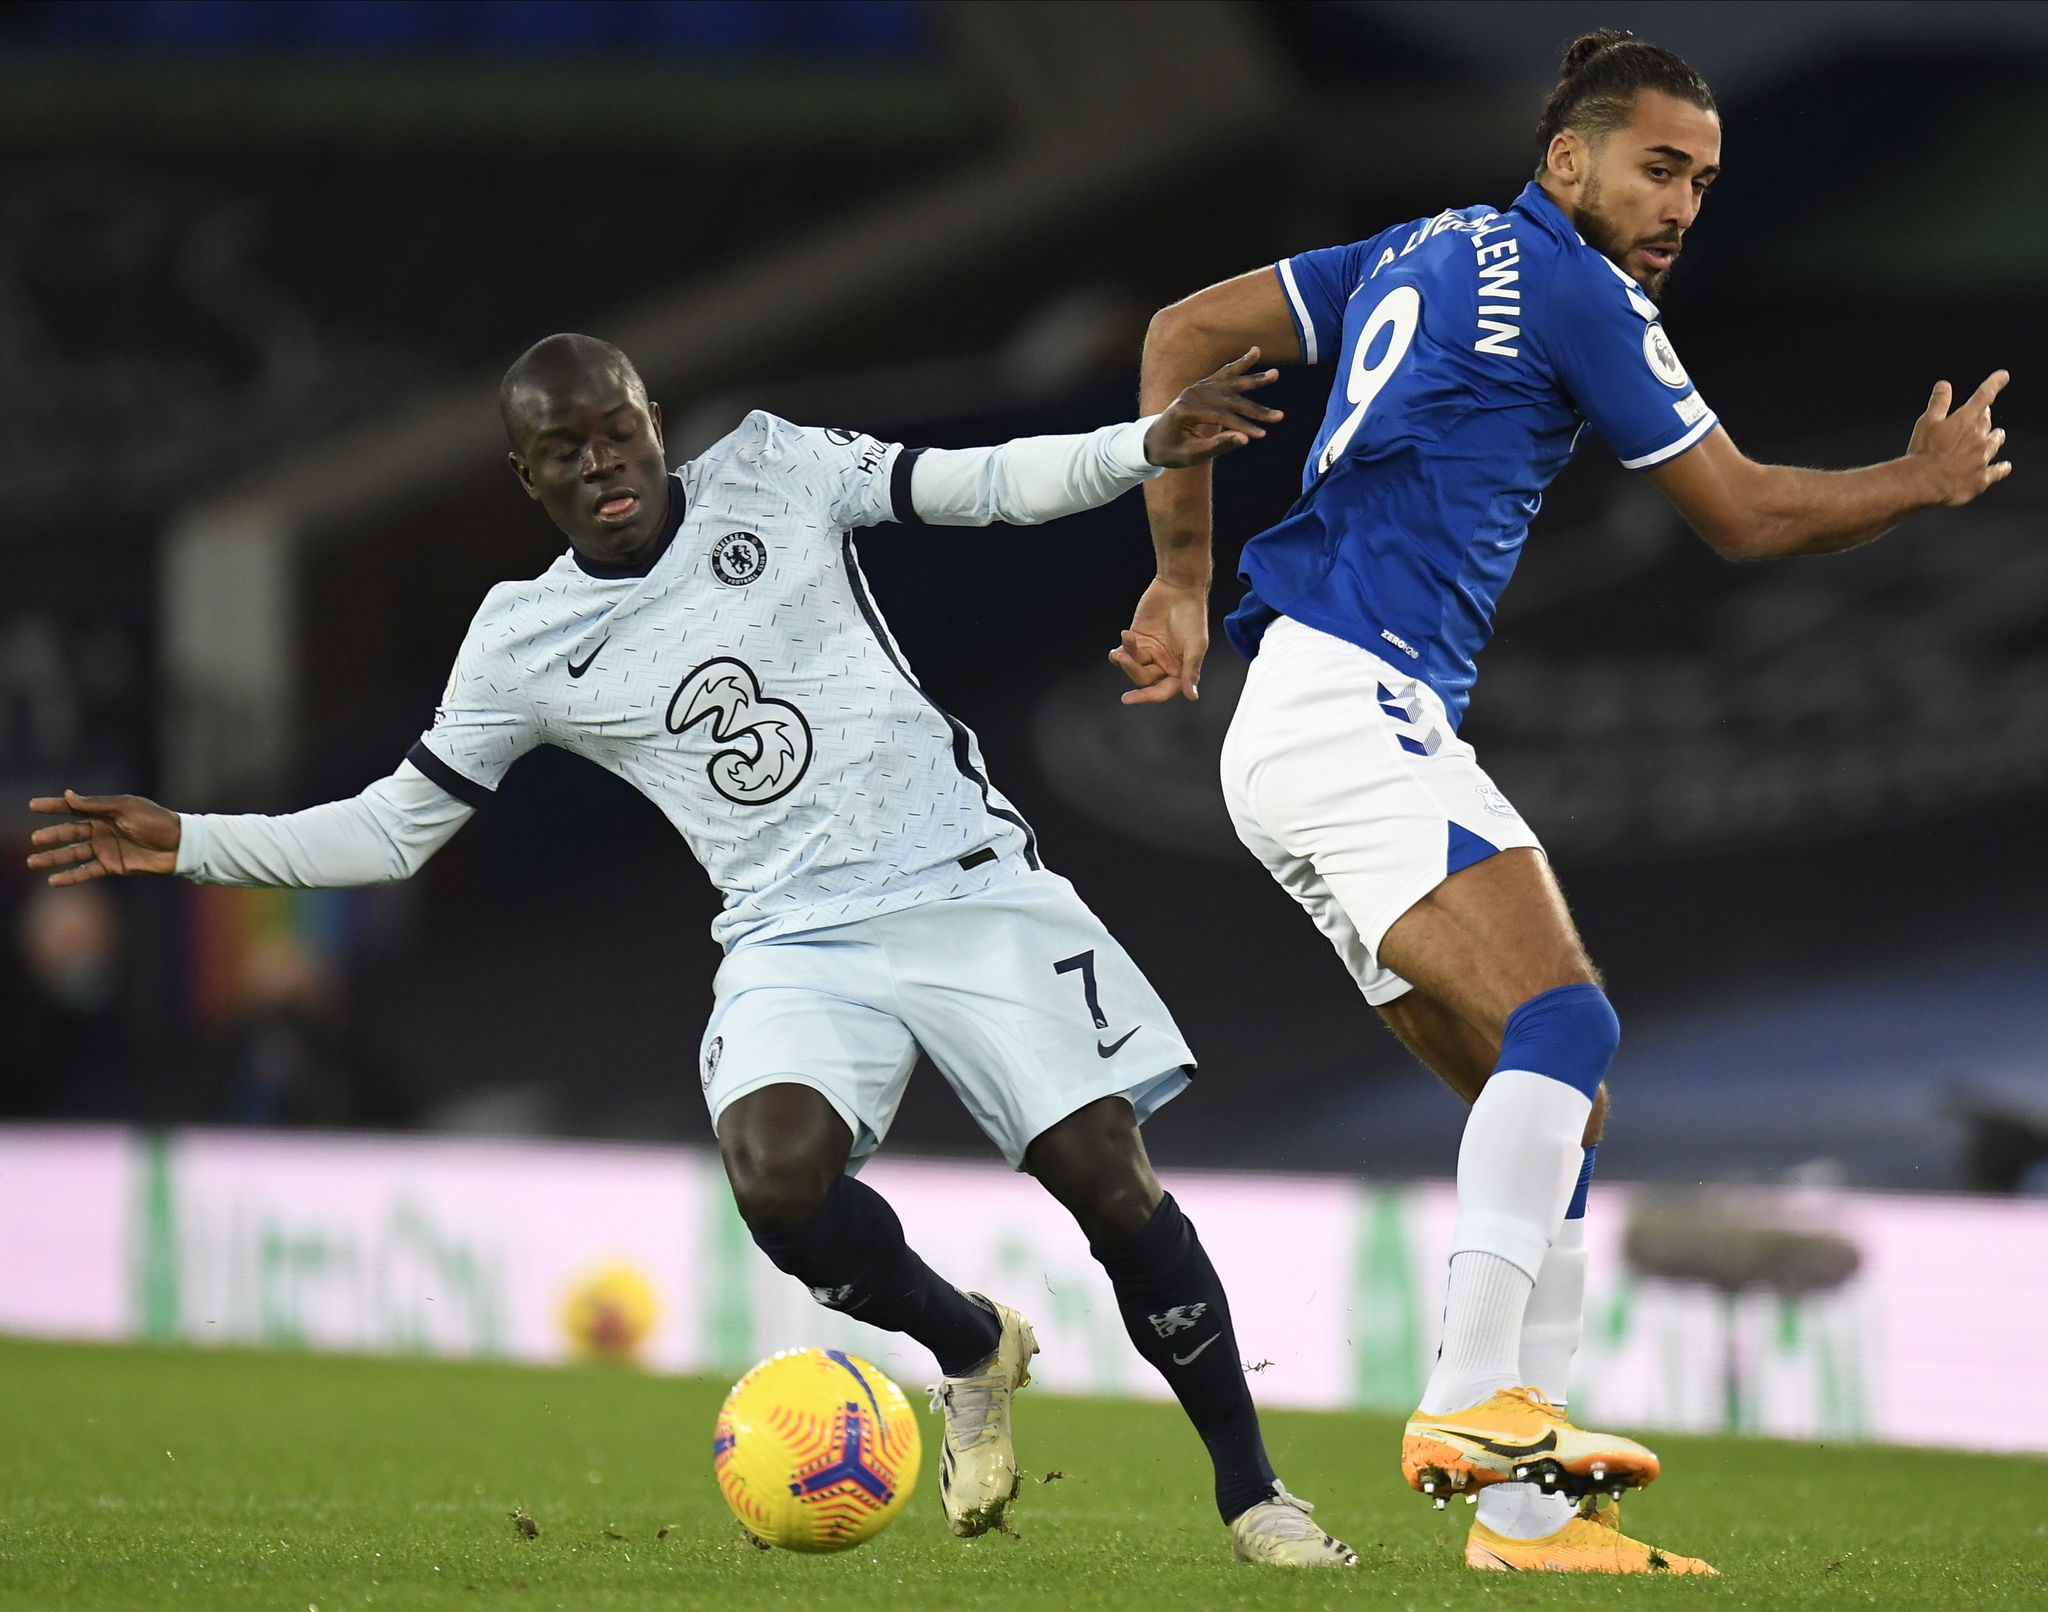 Liverpool (United Kingdom), 12/12/2020.- Chelsea's N'Golo lt;HIT gt;Kante lt;/HIT gt; (L) in action against Everton's Dominic Calvert-Lewin (R) during the English Premier League soccer match between Everton FC and Chelsea FC in Liverpool, Britain, 12 December 2020. (Reino Unido) EFE/EPA/Peter Powell / POOL EDITORIAL USE ONLY. No use with unauthorized audio, video, data, fixture lists, club/league logos or 'live' services. Online in-match use limited to 120 images, no video emulation. No use in betting, games or single club/league/player publications